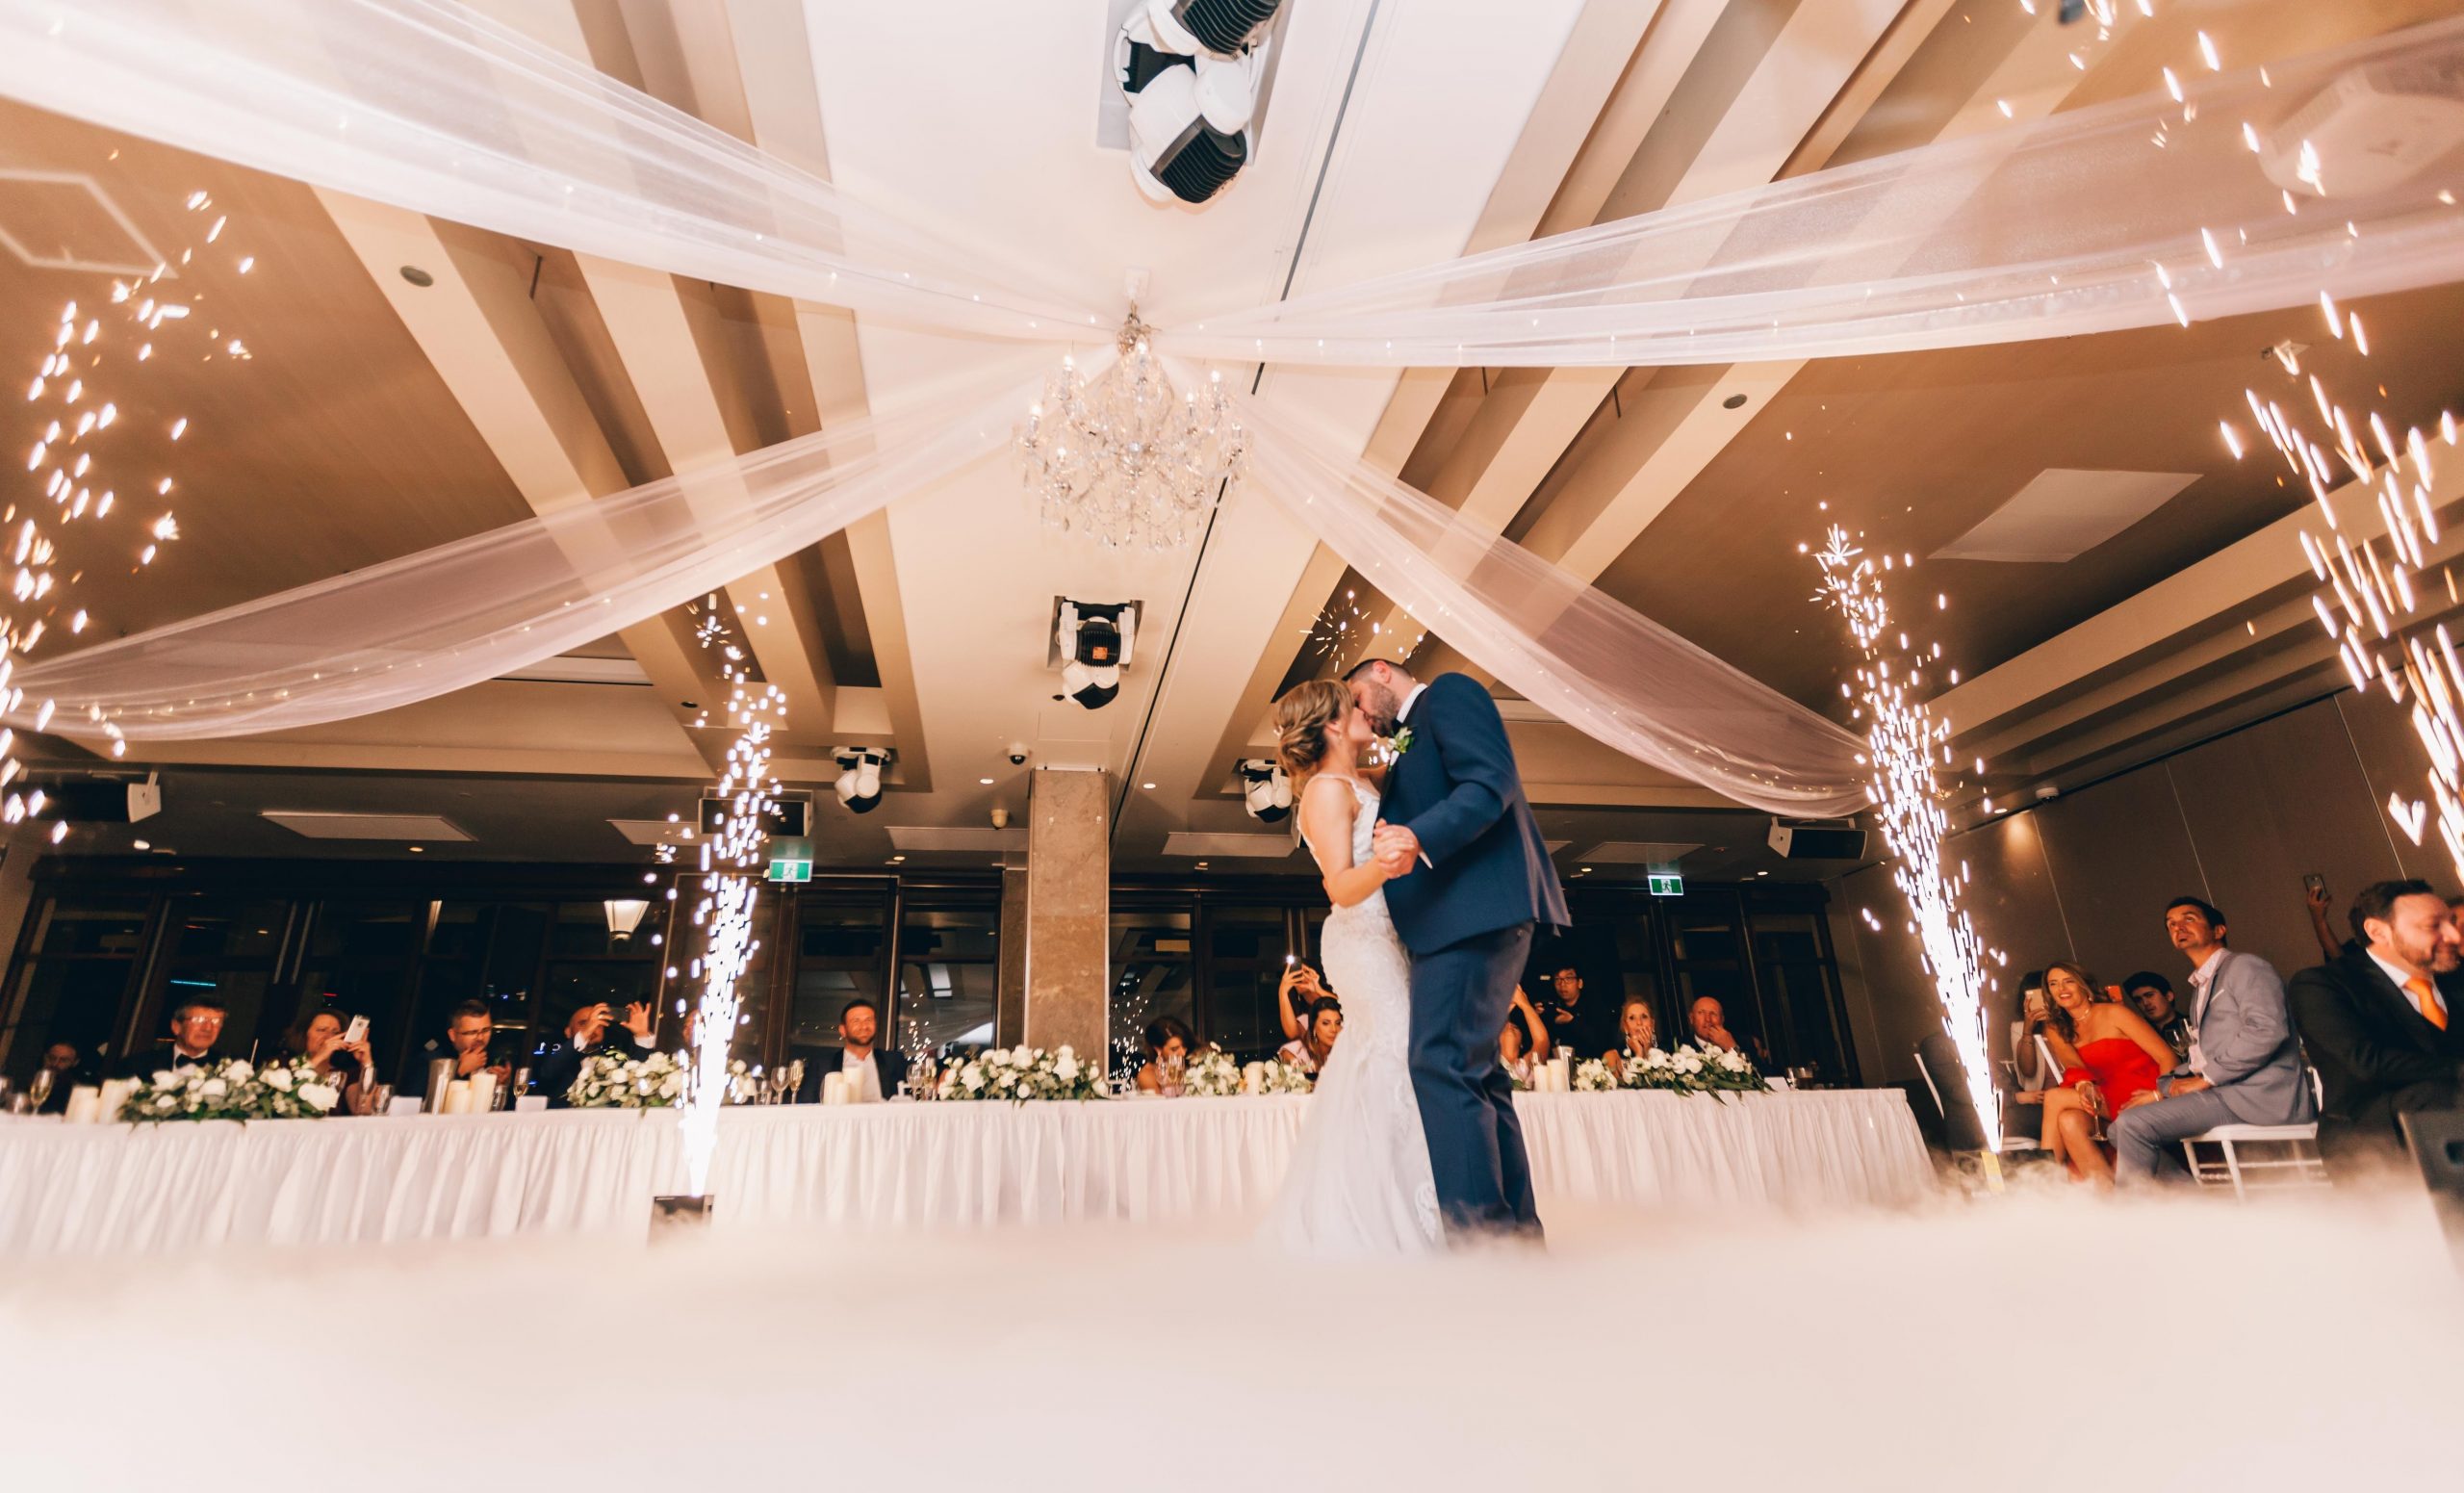 Every Question Answered to Prepare You for Your Wedding’s First Dance